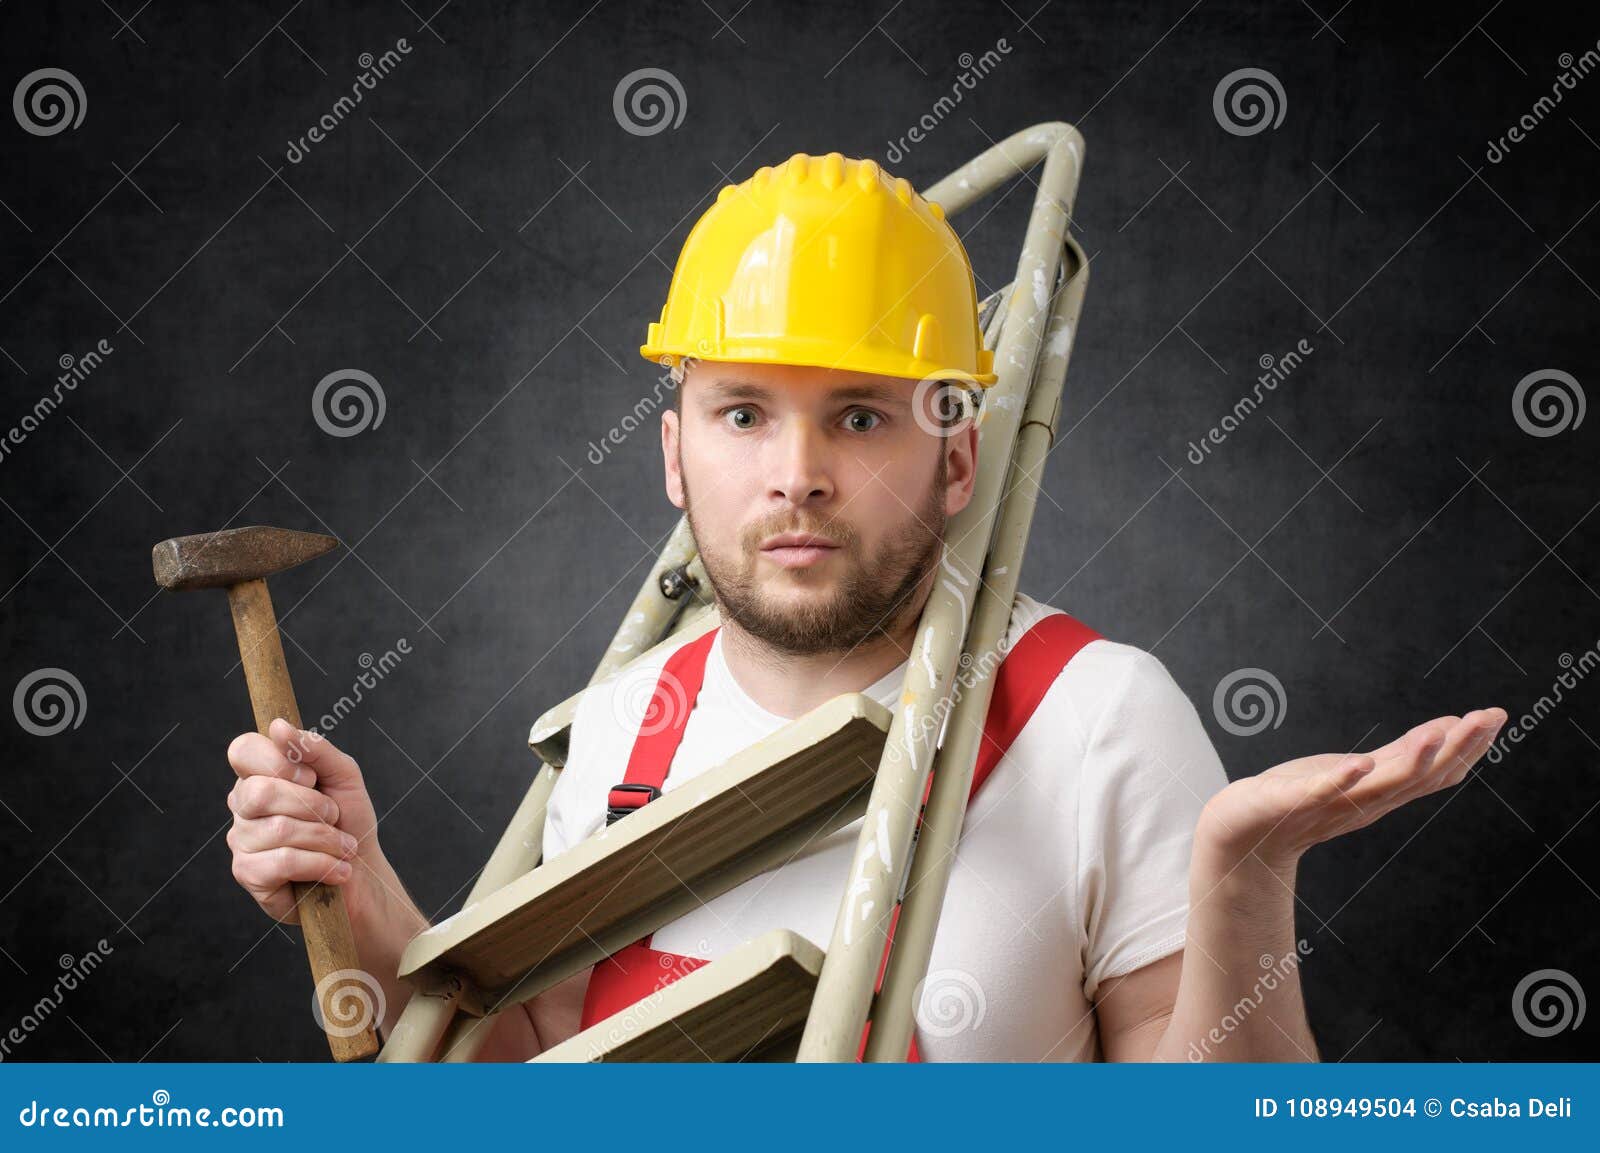 clumsy worker with tools